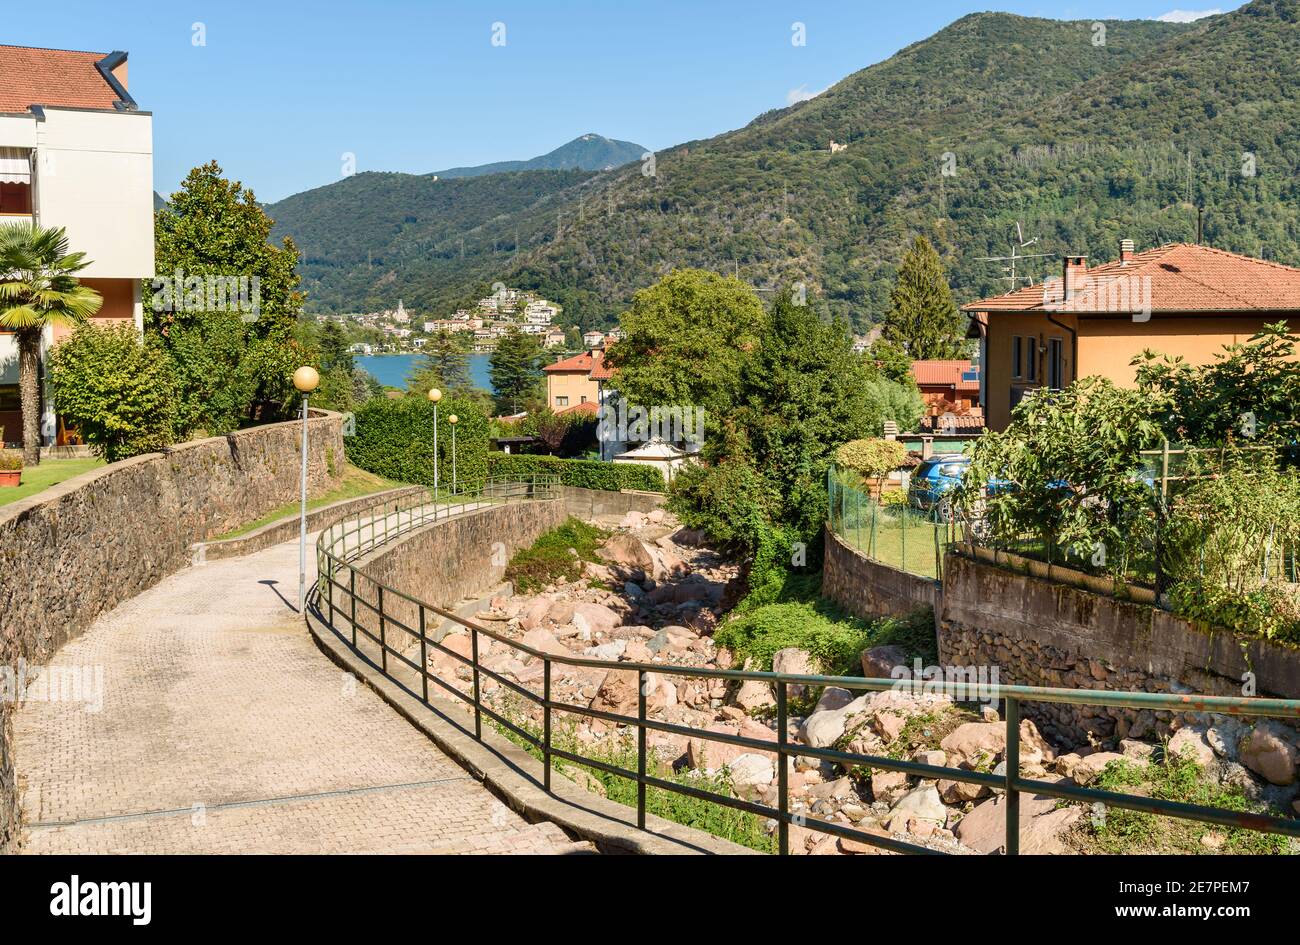 Brusimpiano, a small village on the shore of lake Lugano in province of Varese, Lombardy, Italy Stock Photo